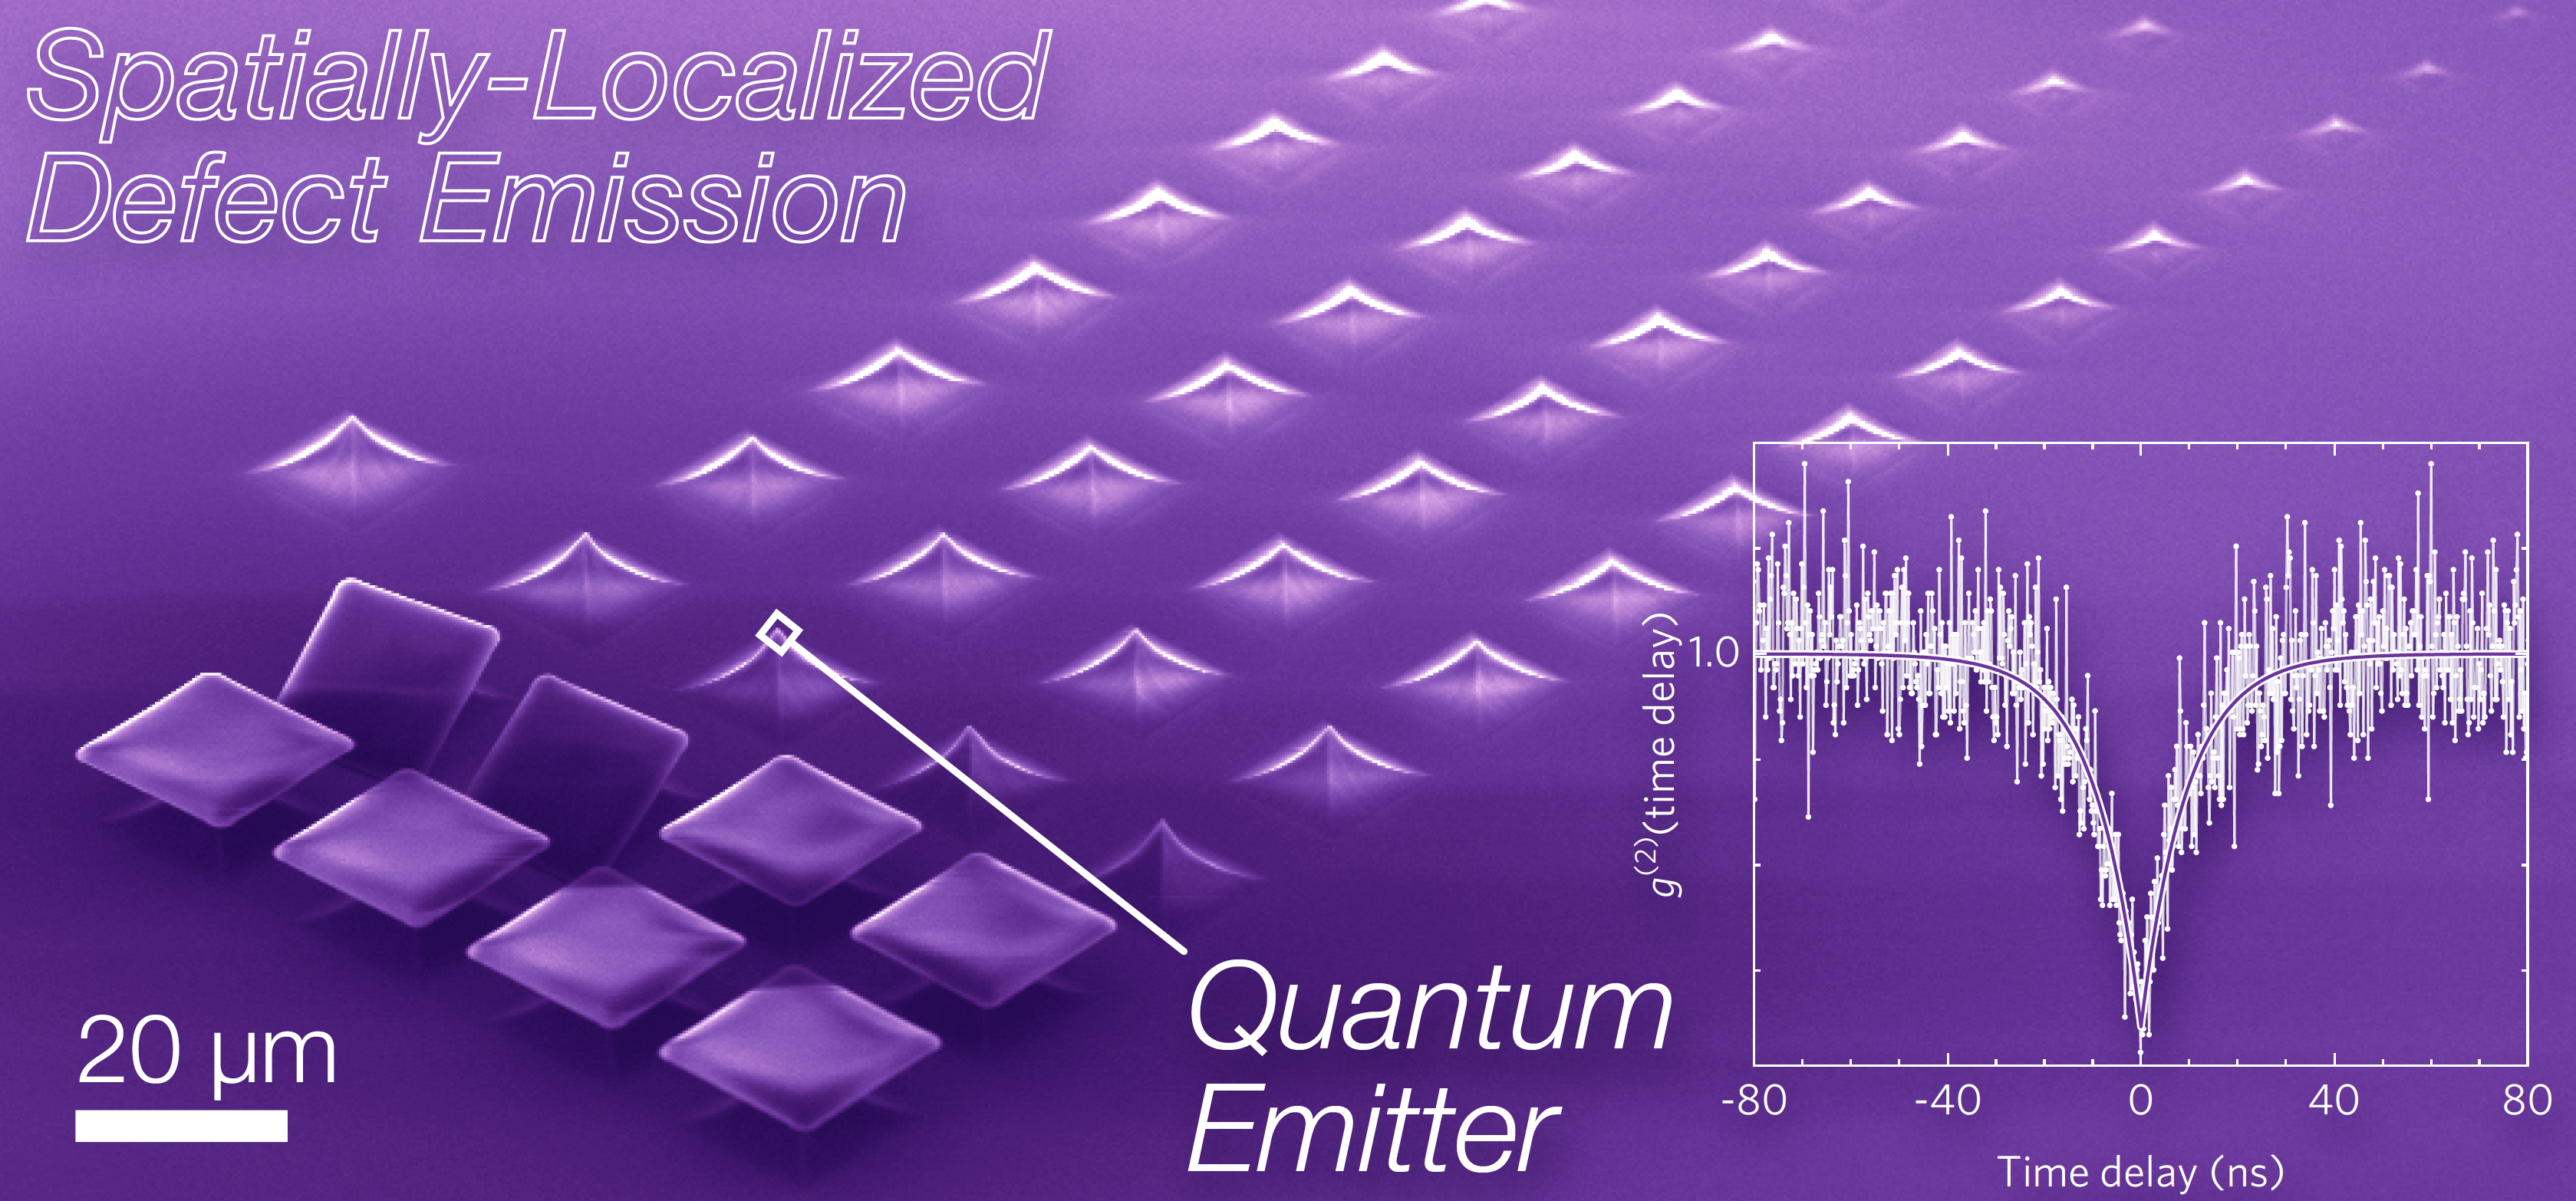 Purple graphic of spatially-localized defect emission looking like a keyboard with a graph to the right.